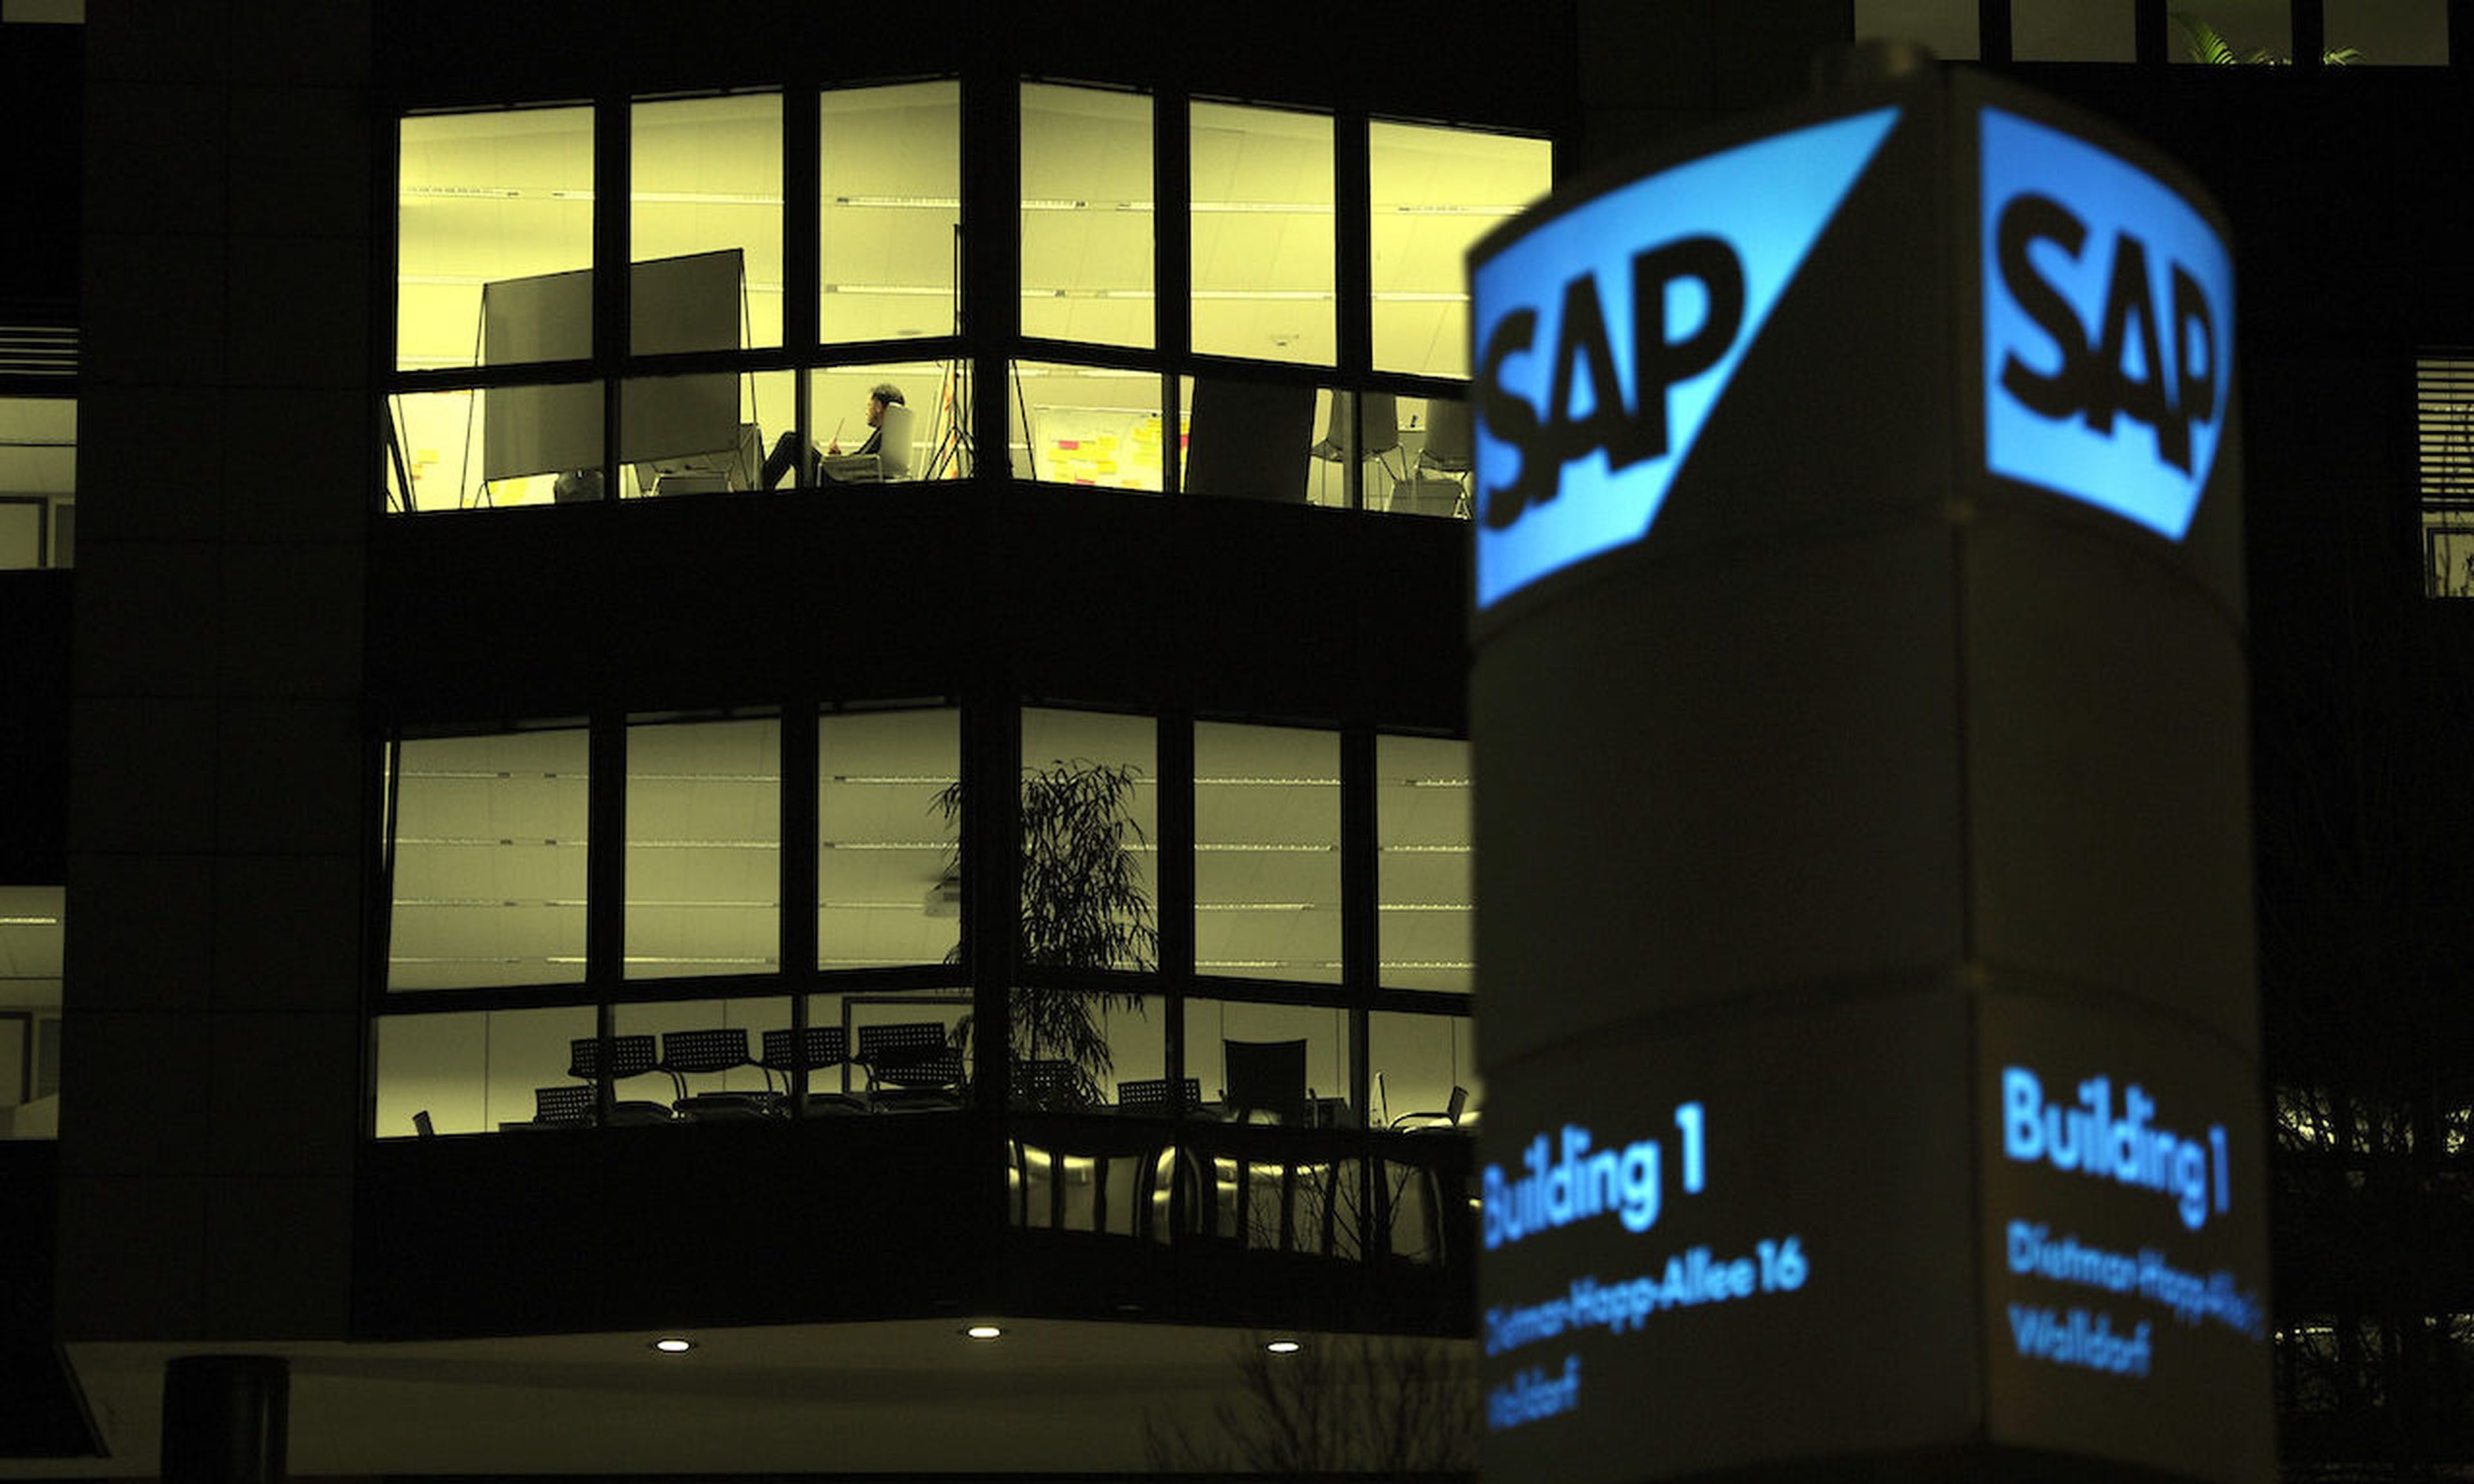 A general view of the headquarters of SAP AG in Walldorf, Germany. (Photo by Thomas Lohnes/Getty Images)